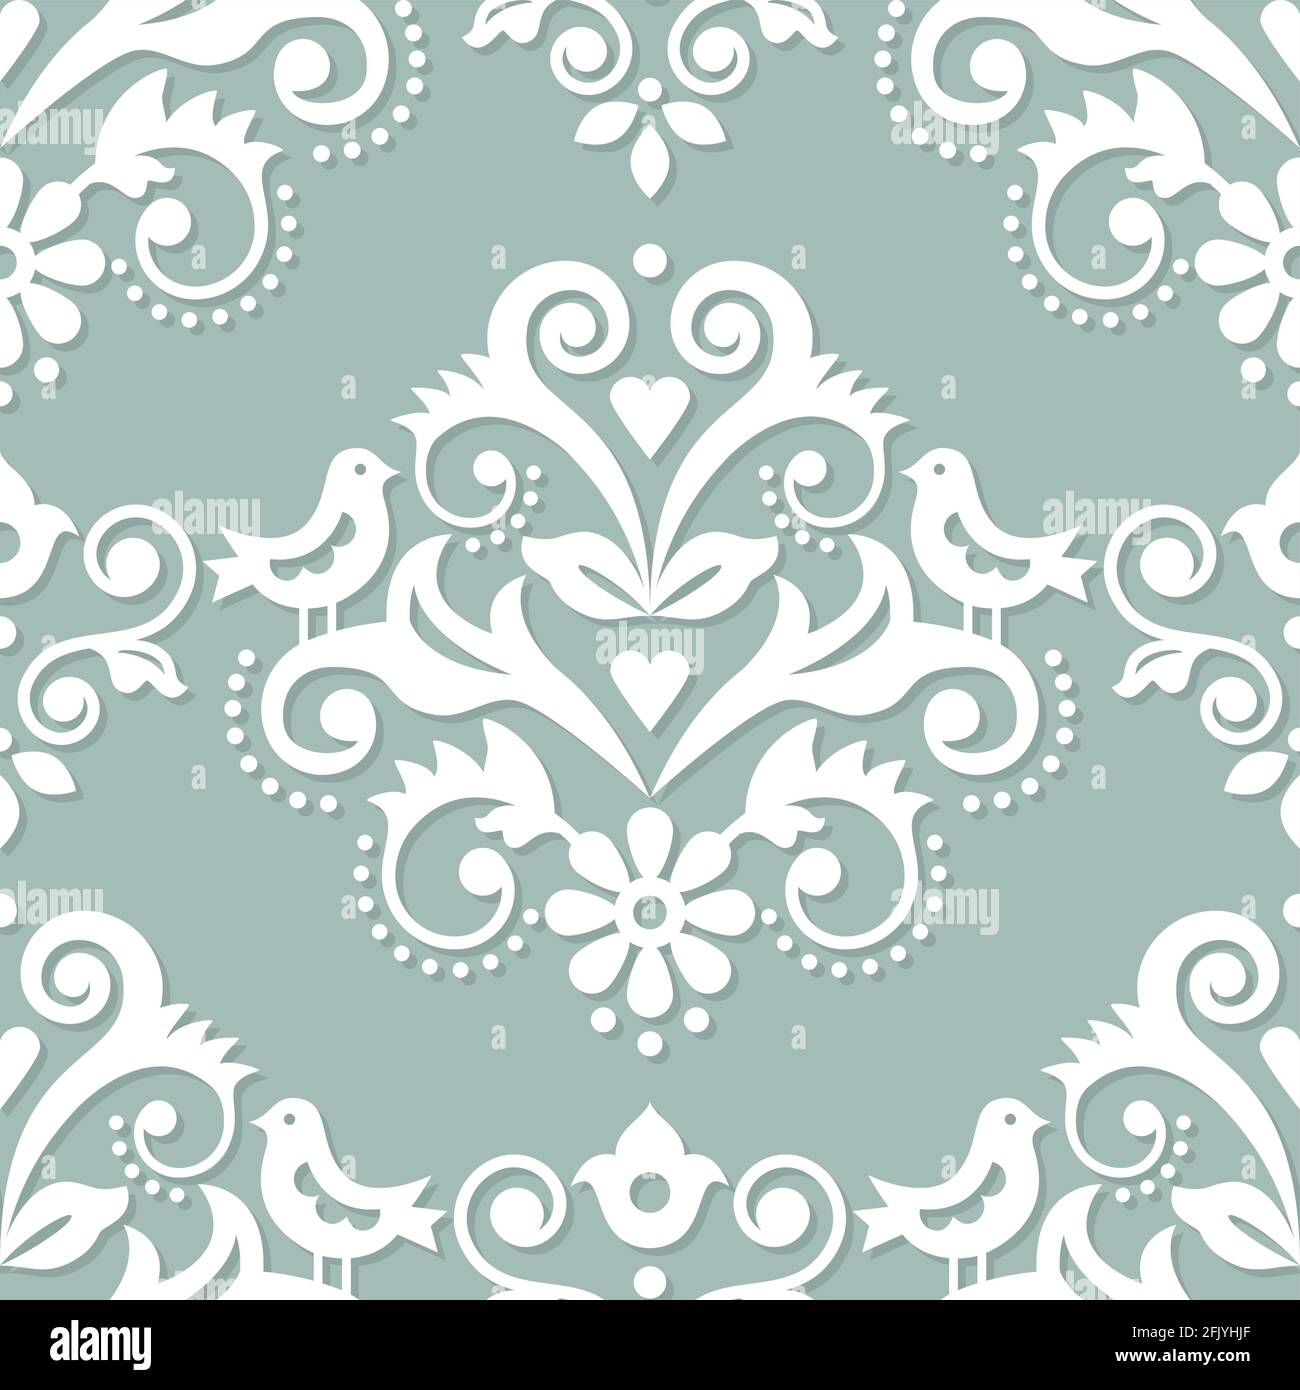 Damask tiled textile or fabric print vector pattern with flowers, birds and swirls, elegant repetitive design Stock Vector